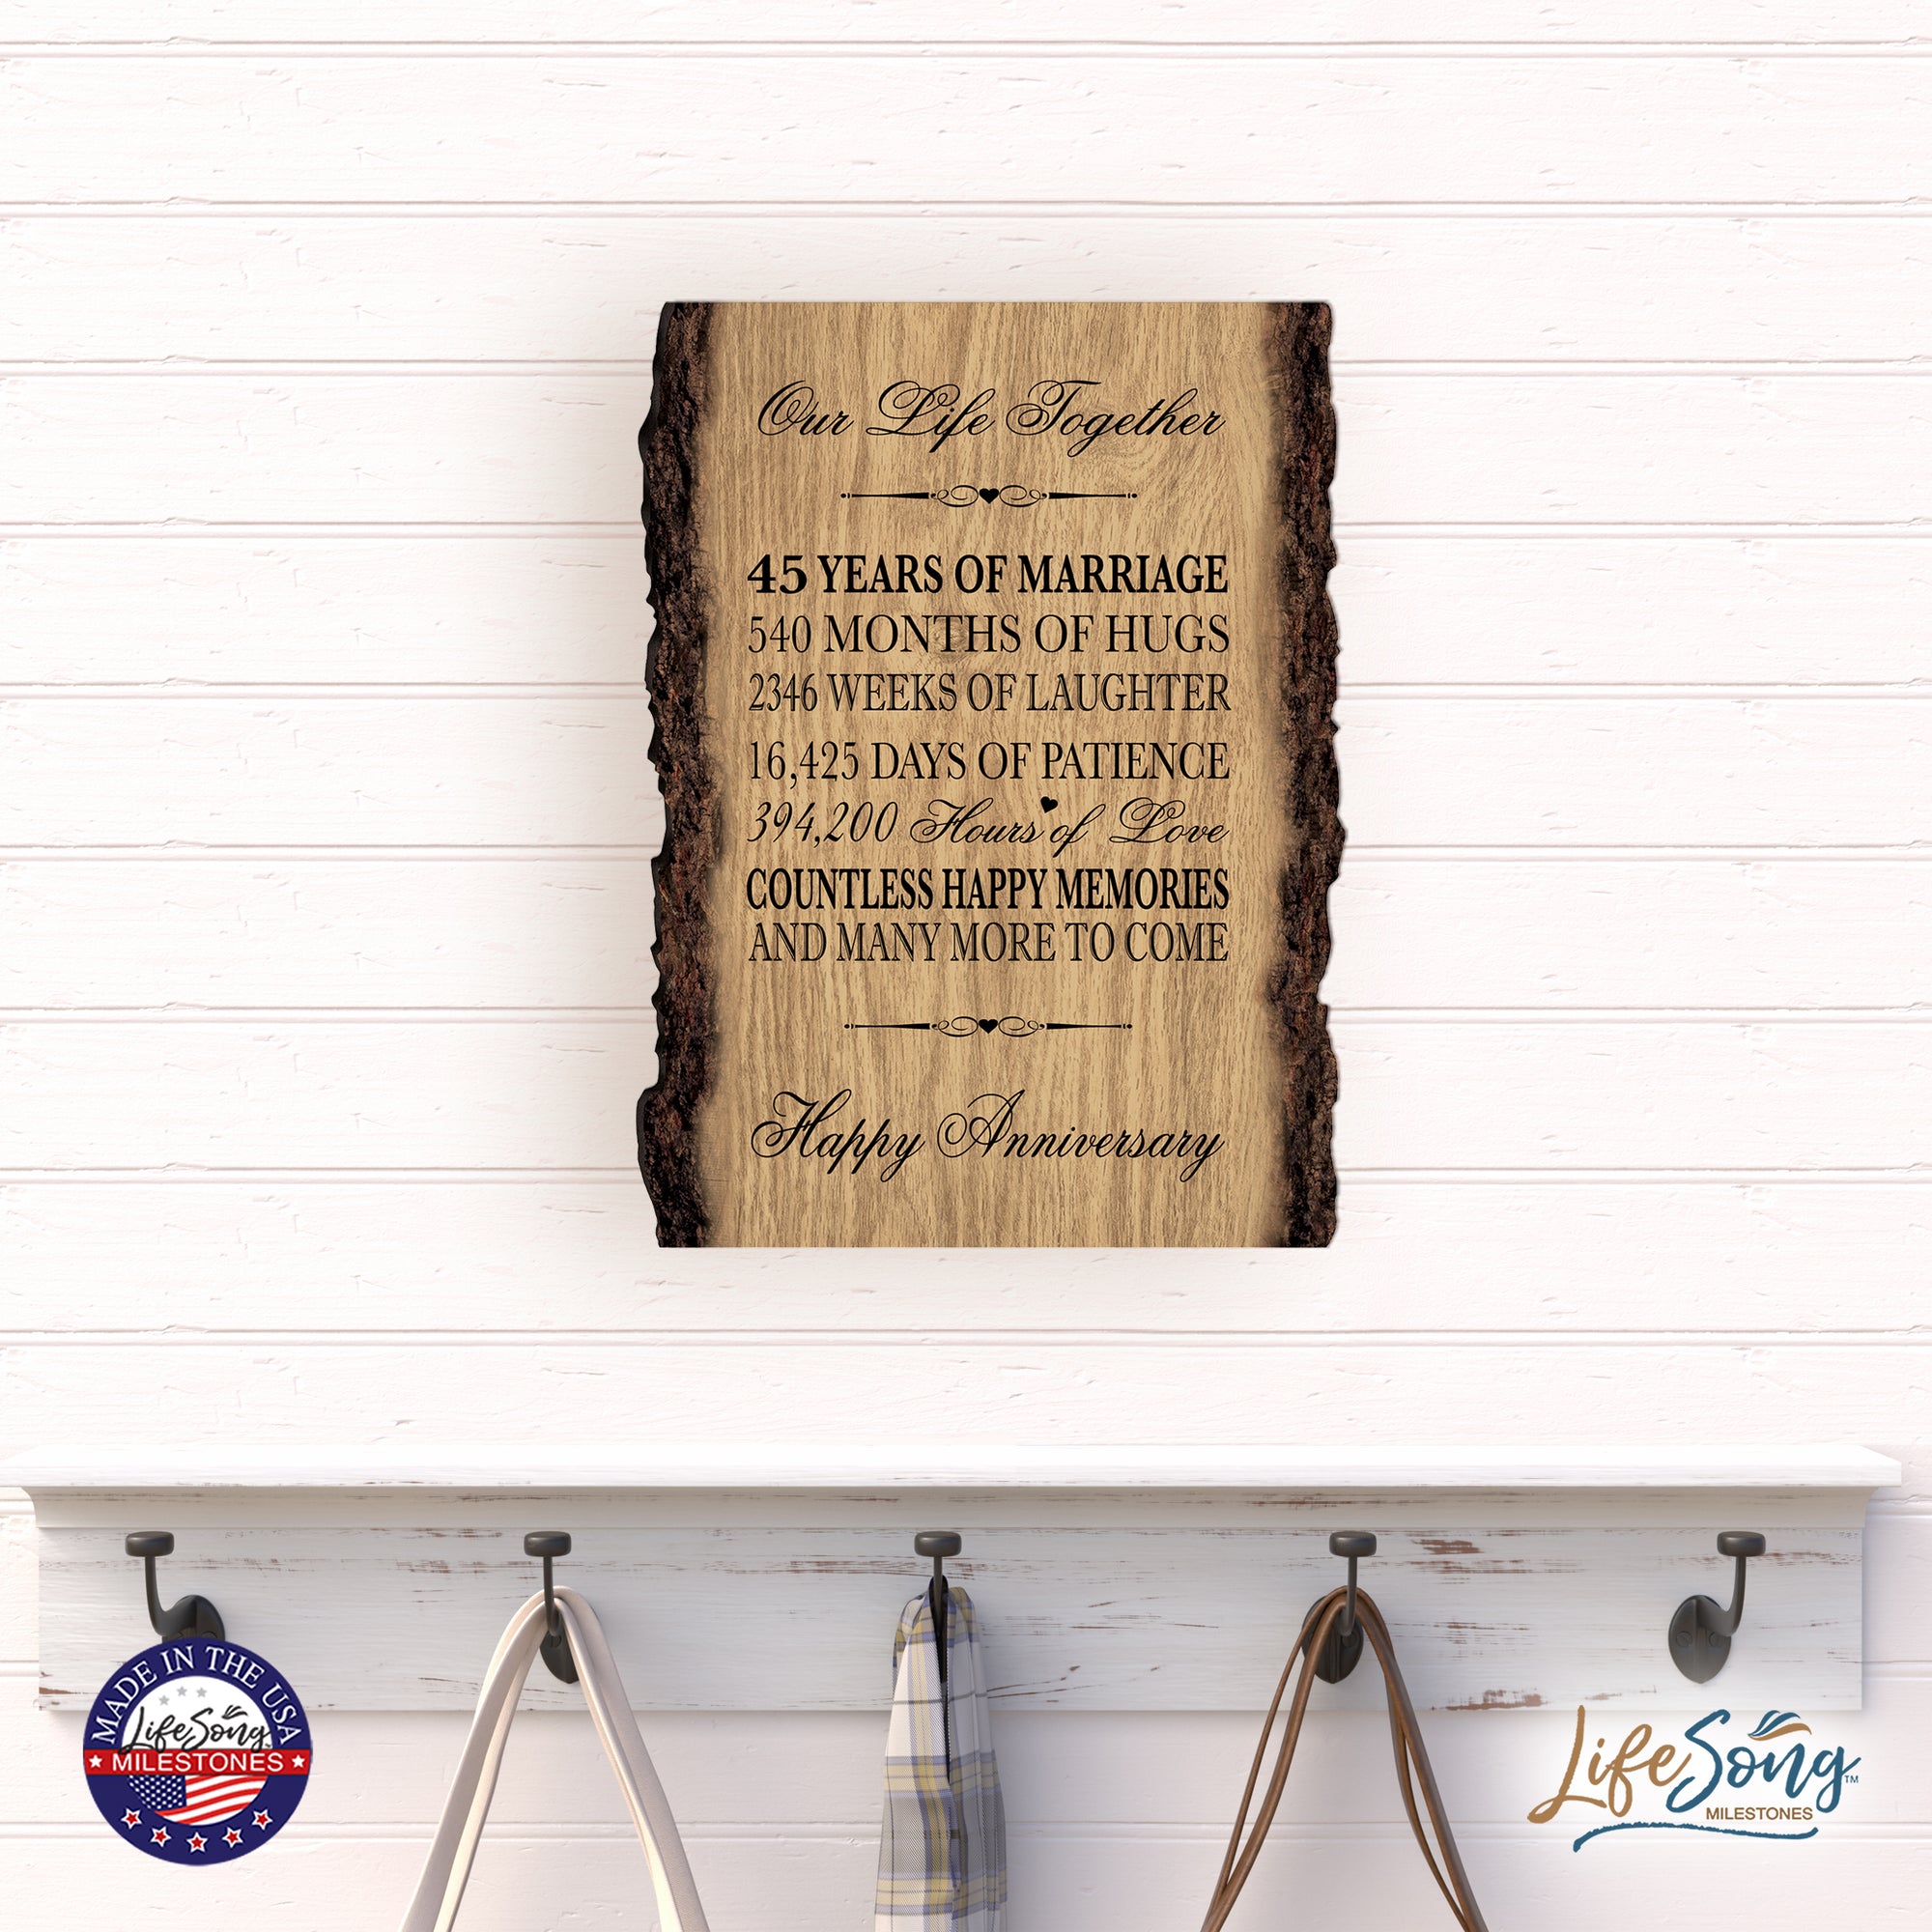 Rustic Wedding Anniversary 9x12 Barky Wall Plaque Gift For Parents, Grandparents New Couple - 45 Years Of Marriage